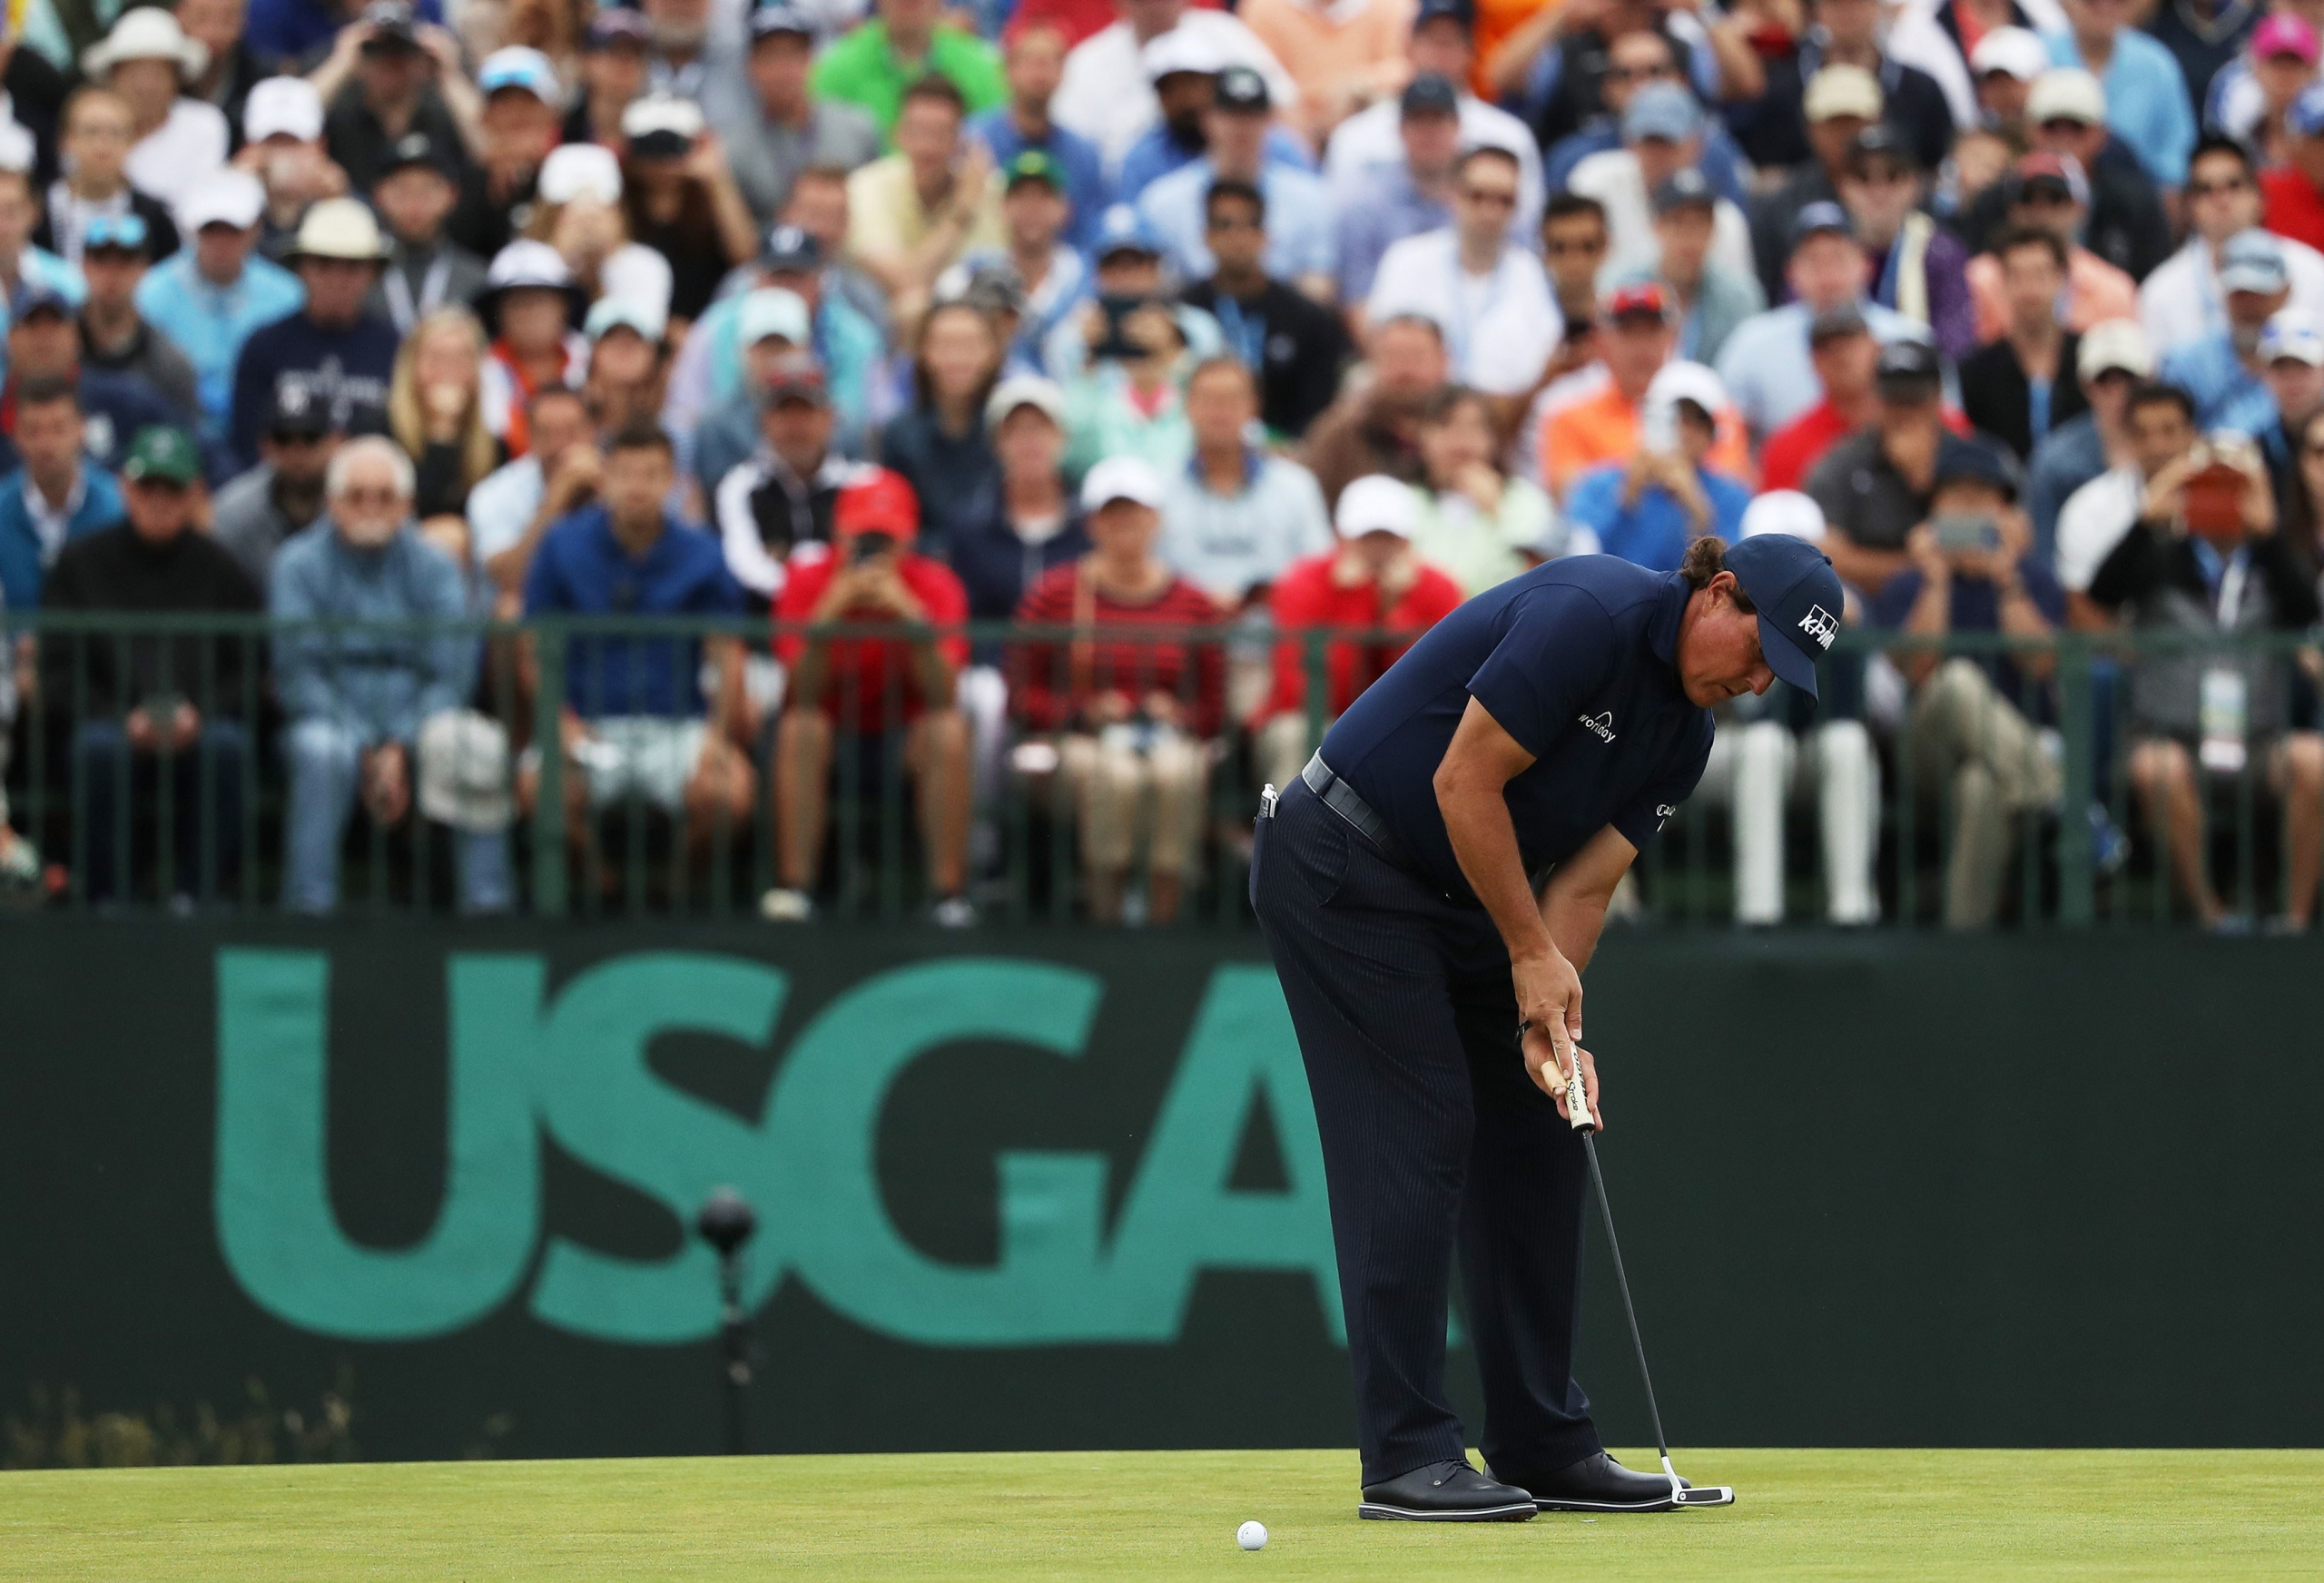 Phil Mickelson says hed turn down a U.S. Open special exemption if offered one